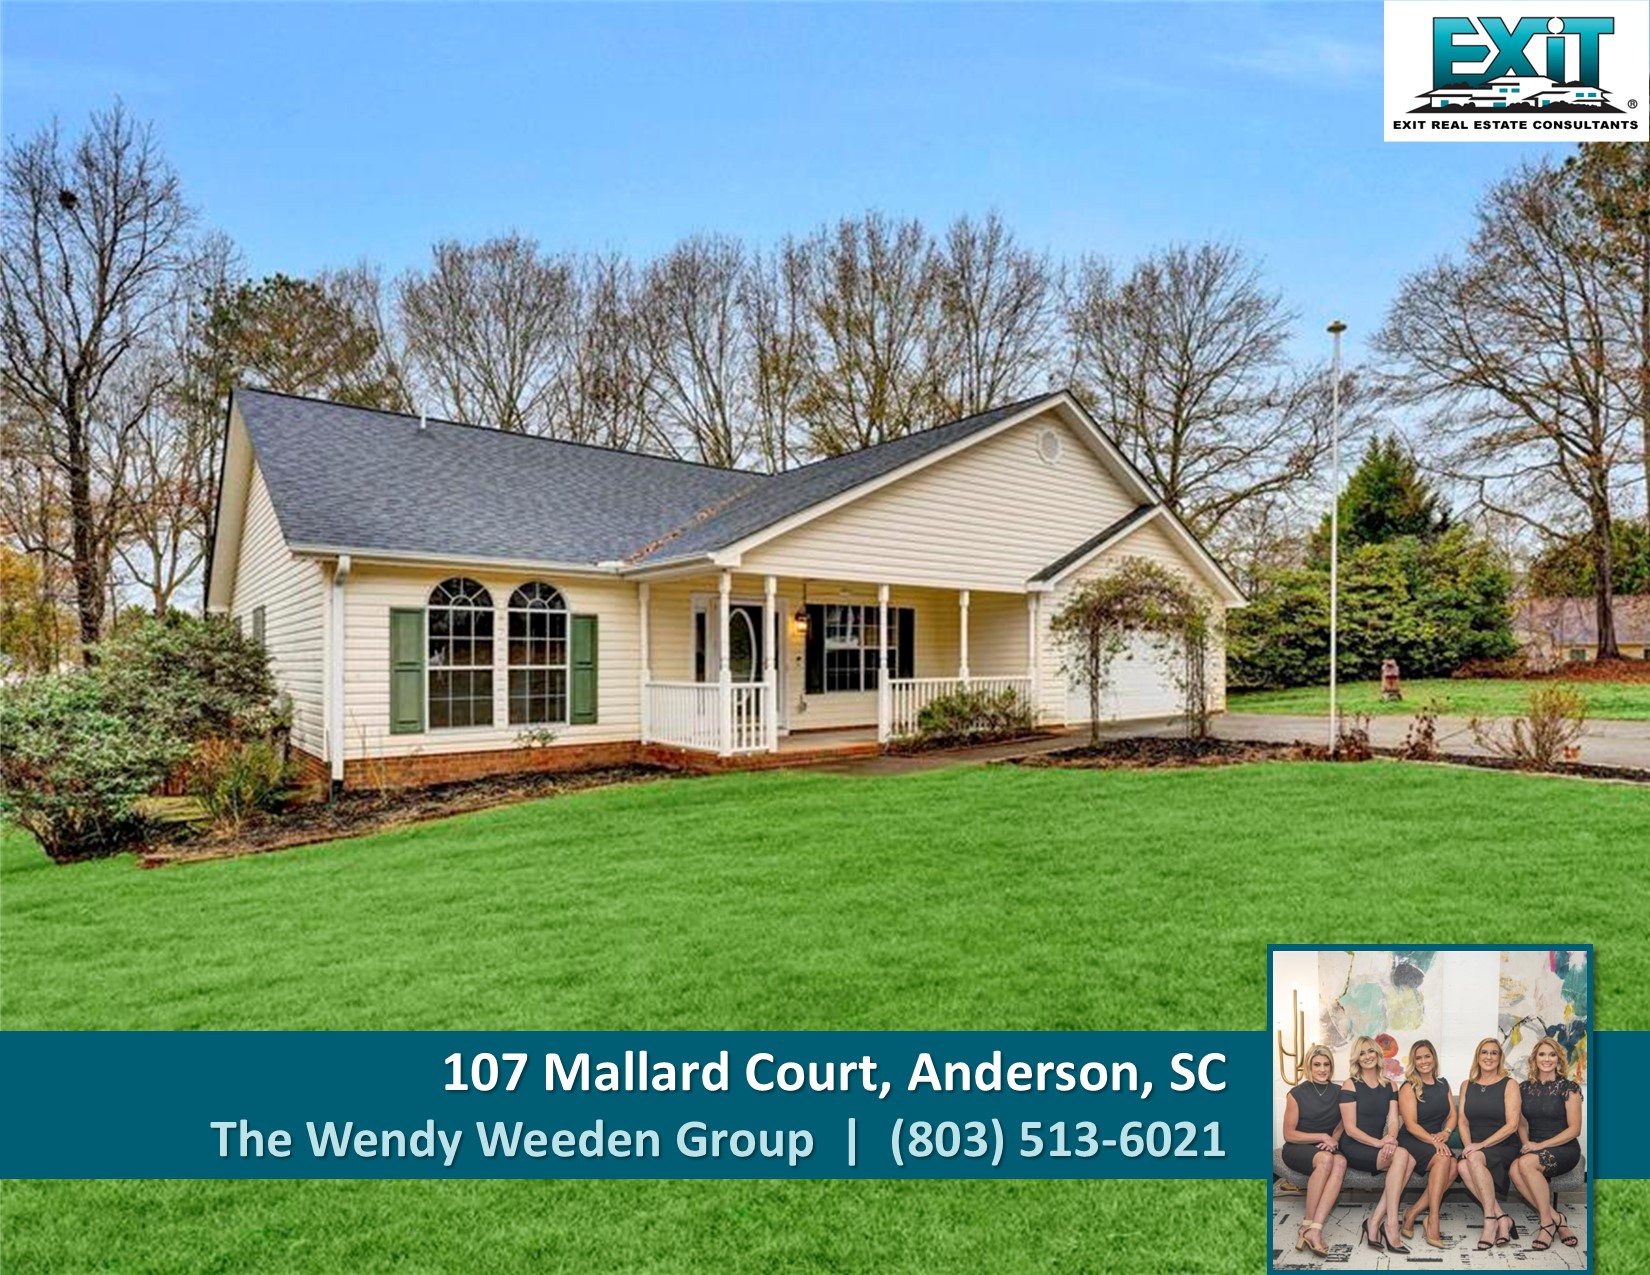 Just listed in Anderson